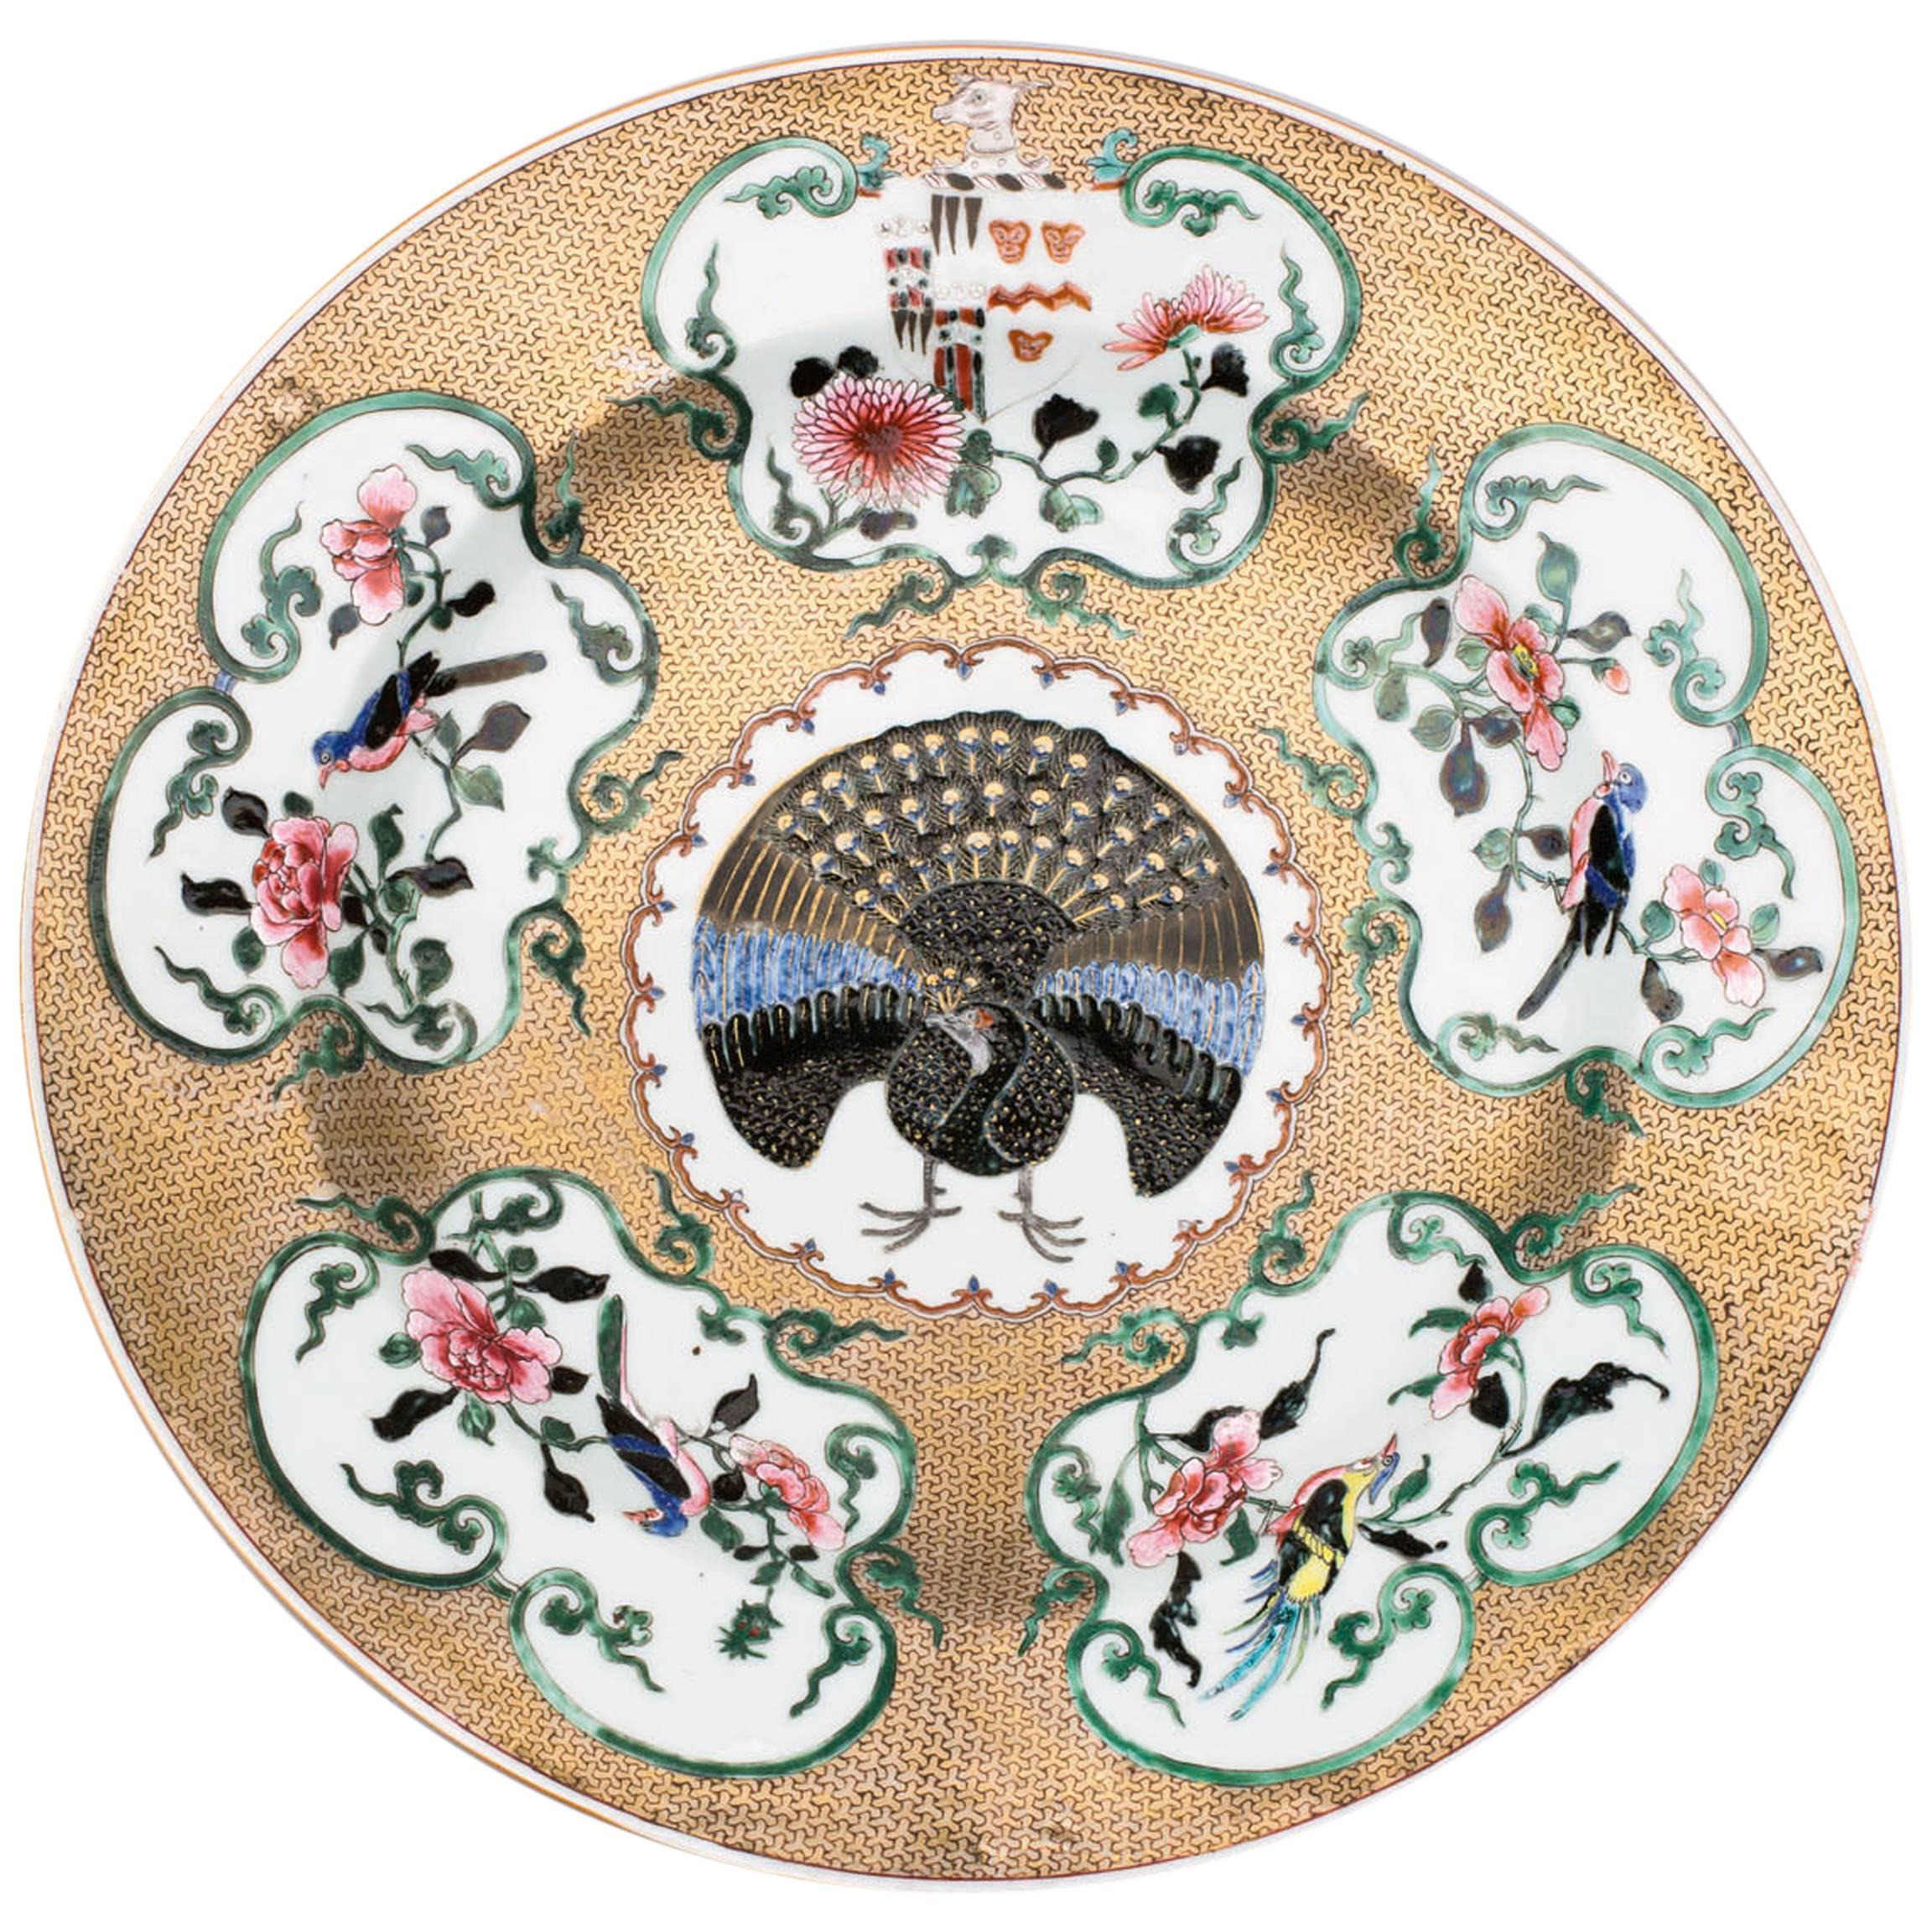 Famille rose armorial dish, arms of Lawson impaling Jessop, 18th century